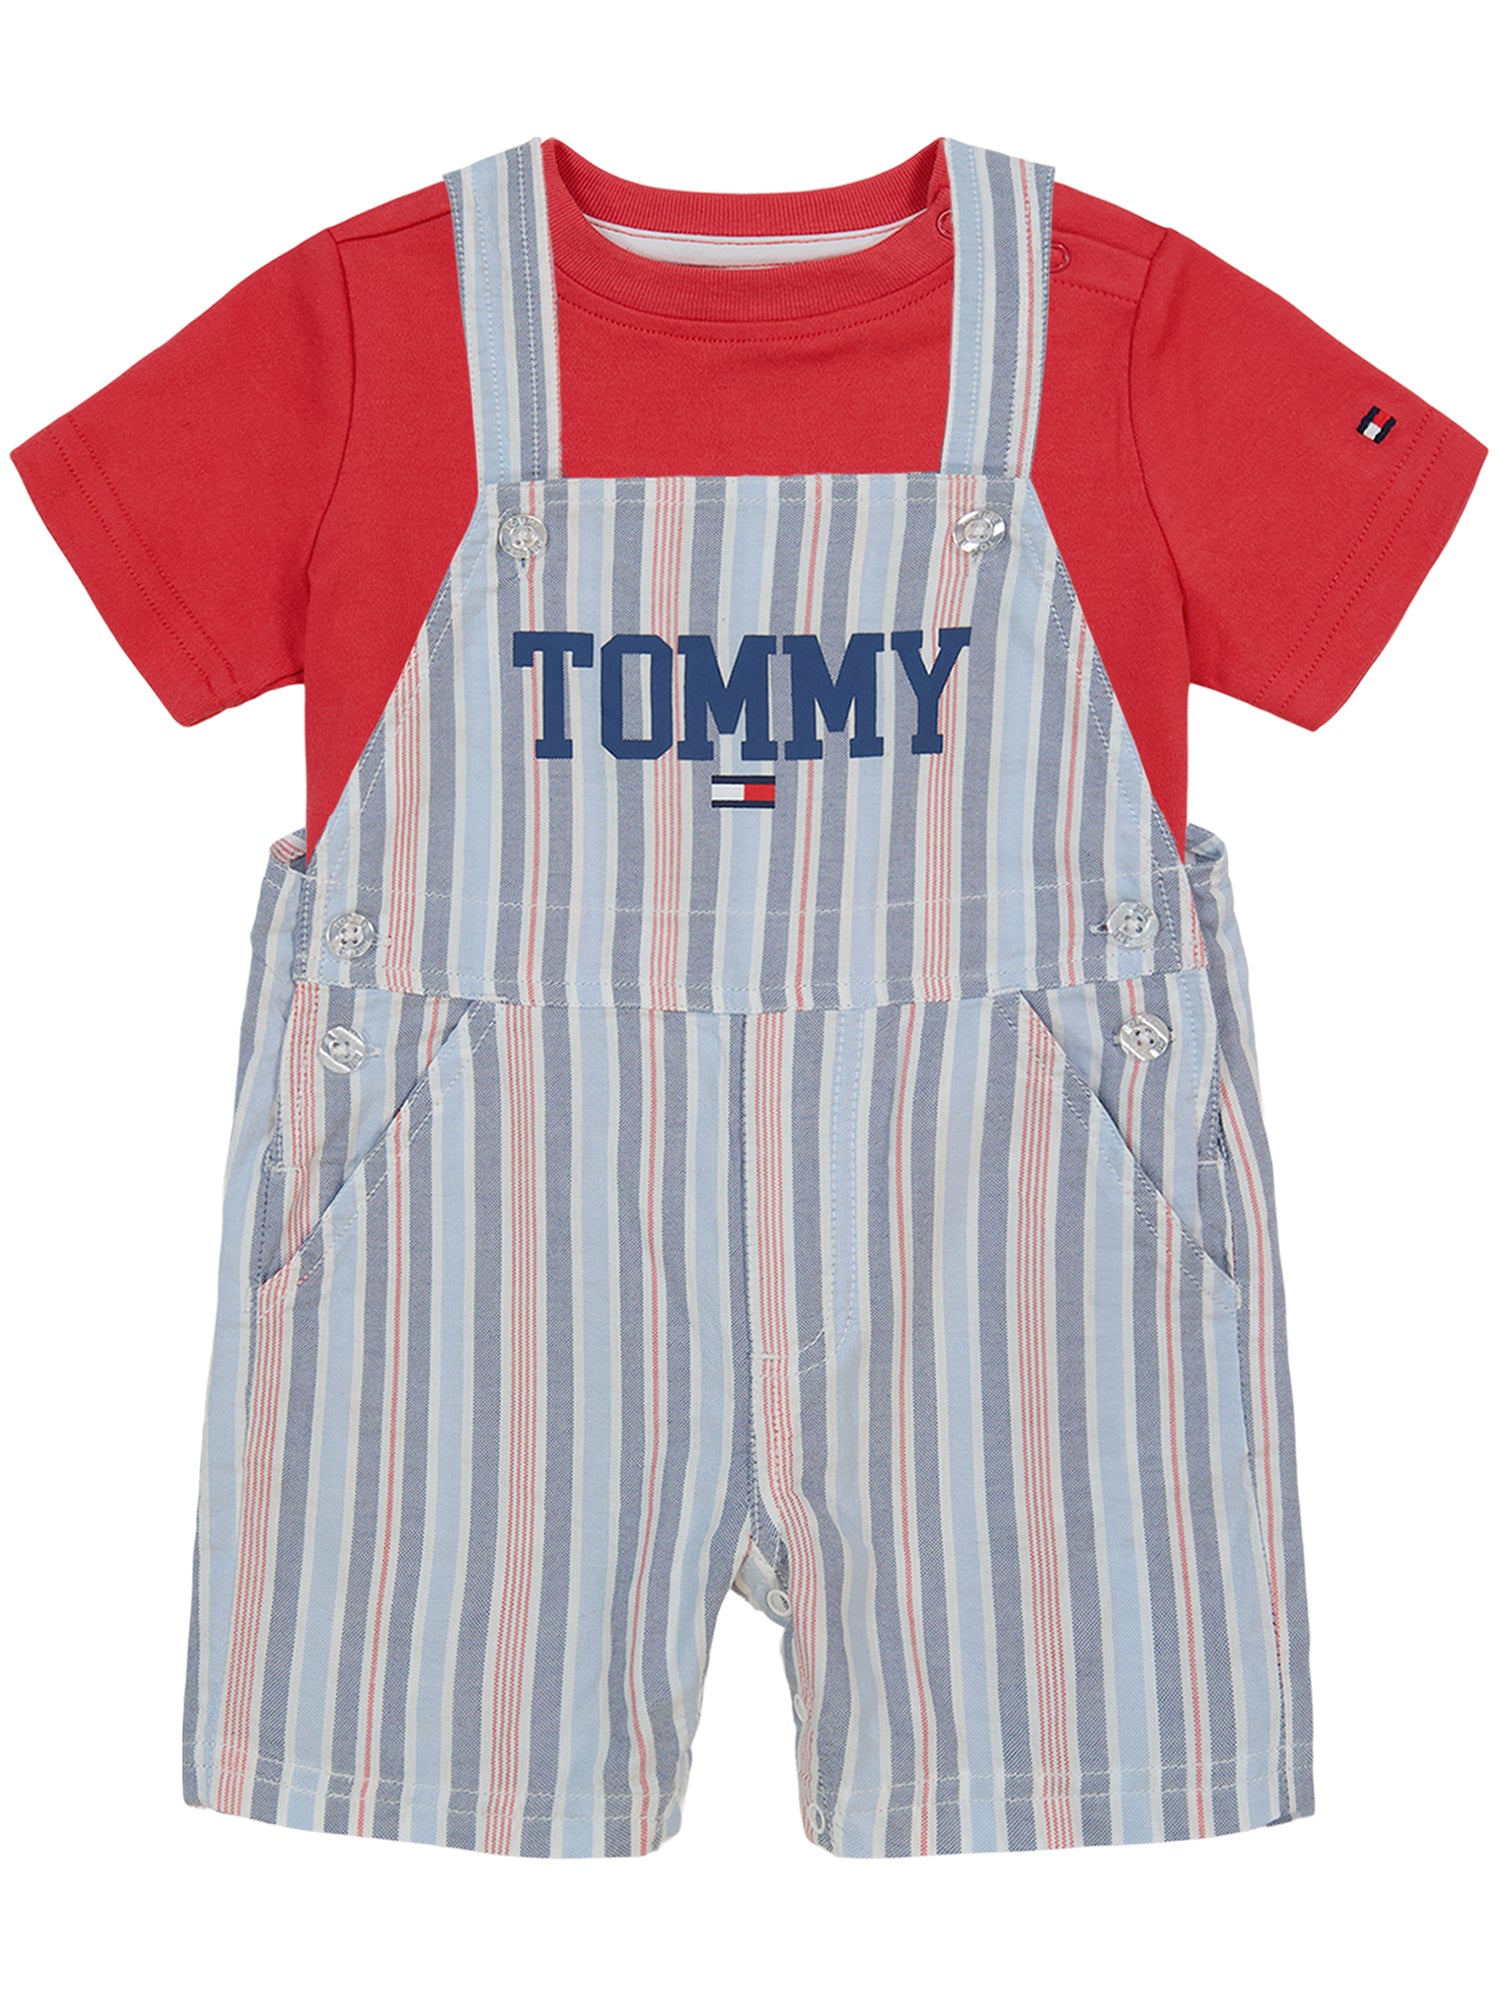 Tommy Hilfiger Red and Blue Stripe Shortall Set